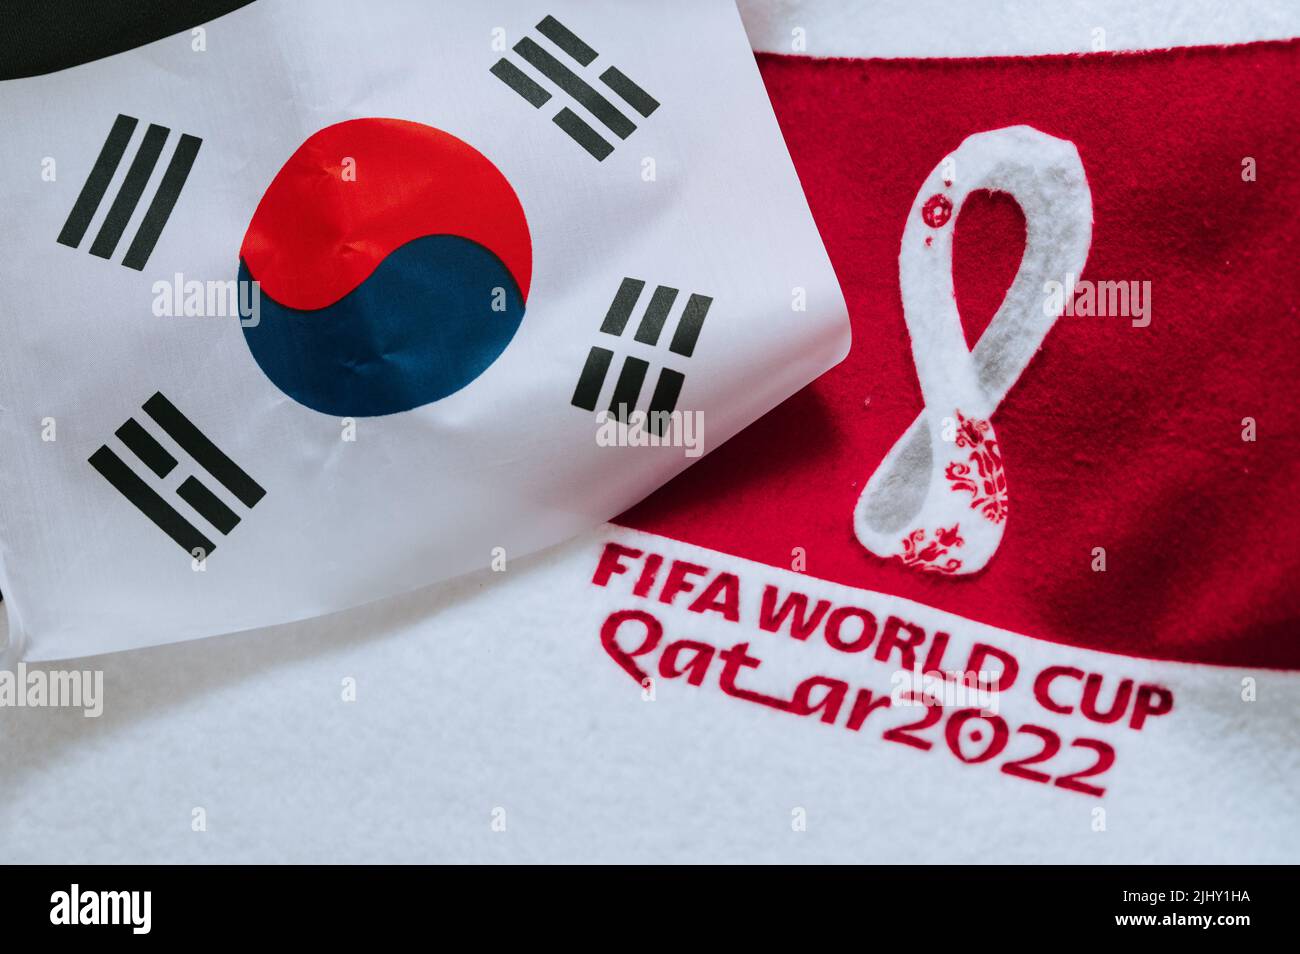 QATAR, DOHA, 18 JULY, 2022: South Korea National flag and logo of FIFA World Cup in Qatar 2022 on red carpet. Soccer sport background, edit space. Qat Stock Photo